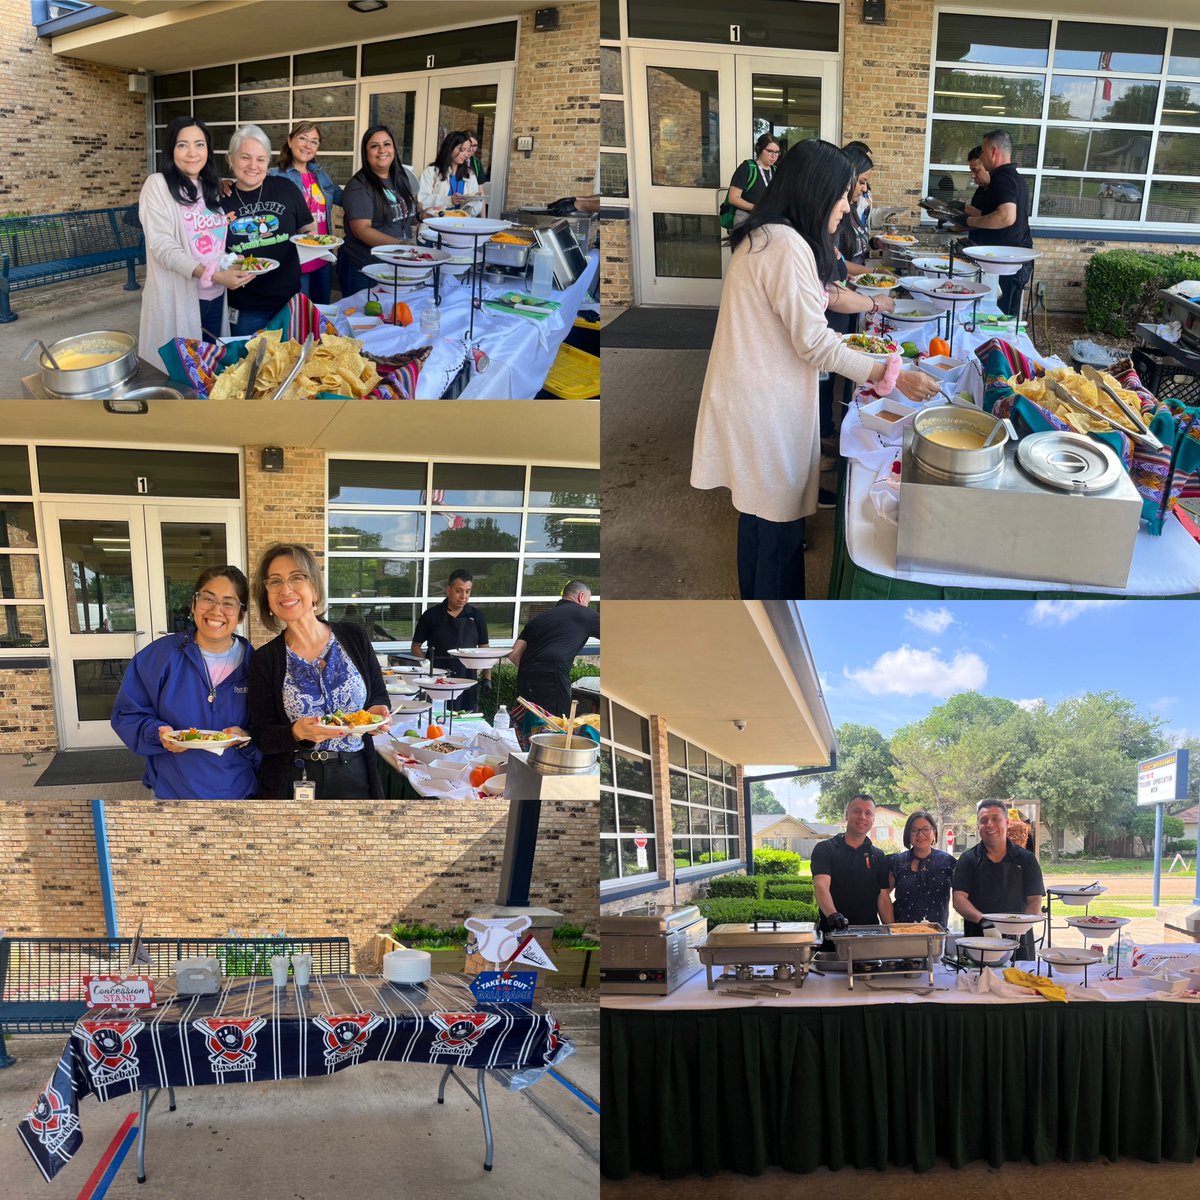 'Let's Taco 'Bout how awesome our teachers are! 🌮 Huge shoutout to Mrs. Gutierrez,her husband and El Sabroso Taqueria for hosting our teacher appreciation lunch today.@BadosCeci @pkehoe06 @BES_Cowboys